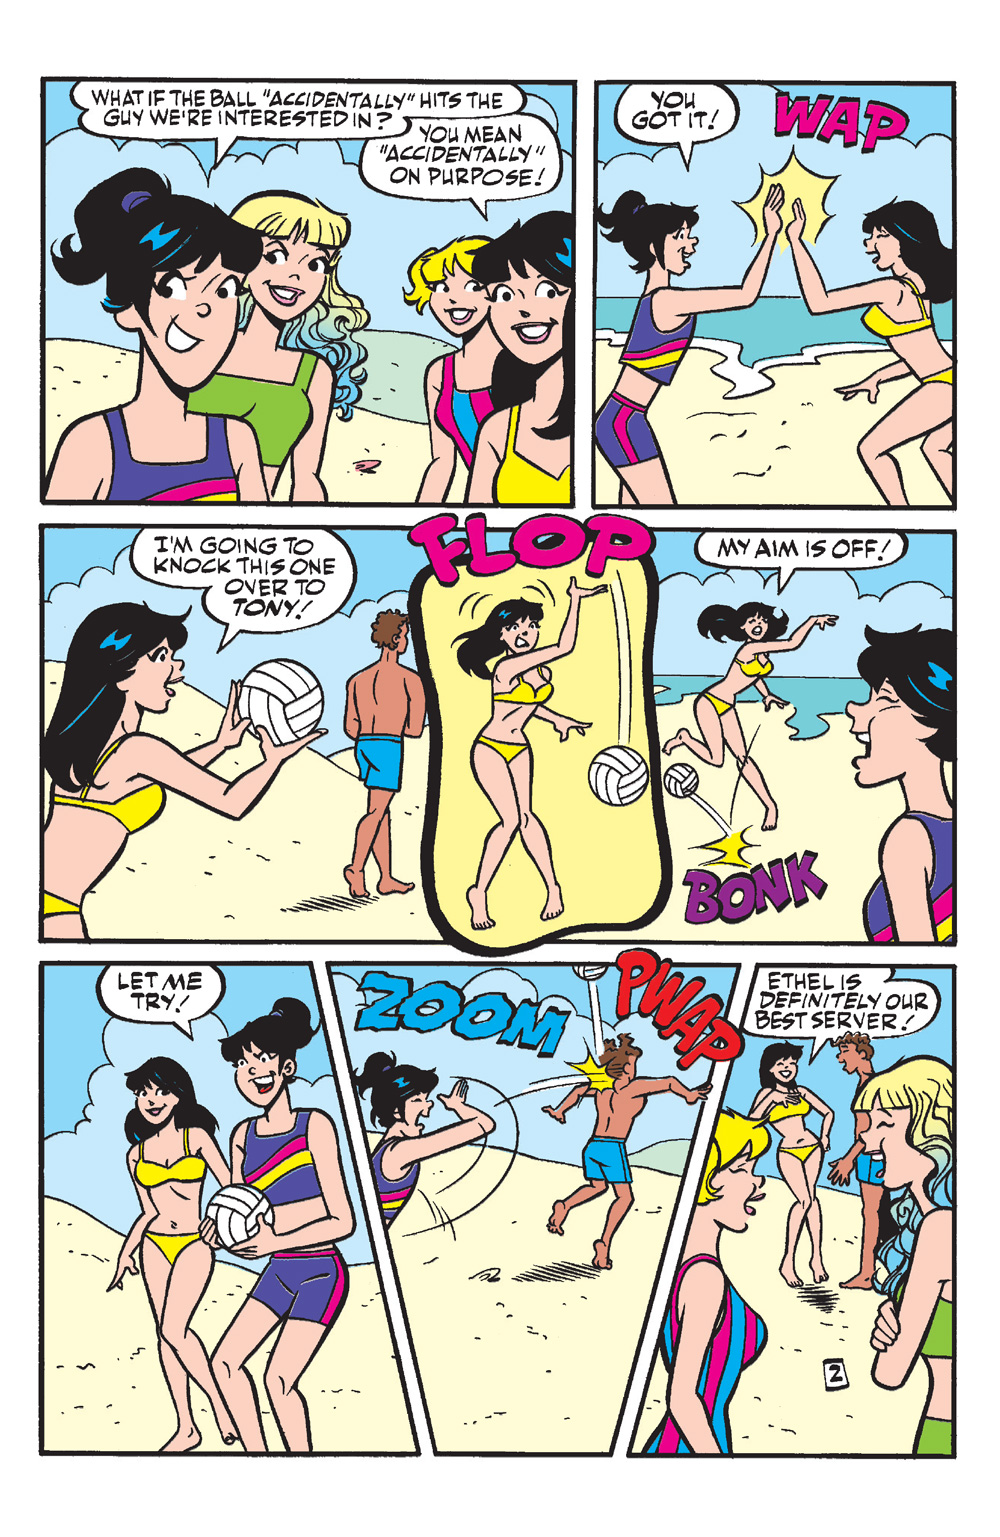 An interior story page from BETTY & VERONICA SUMMER SPECTACULAR.